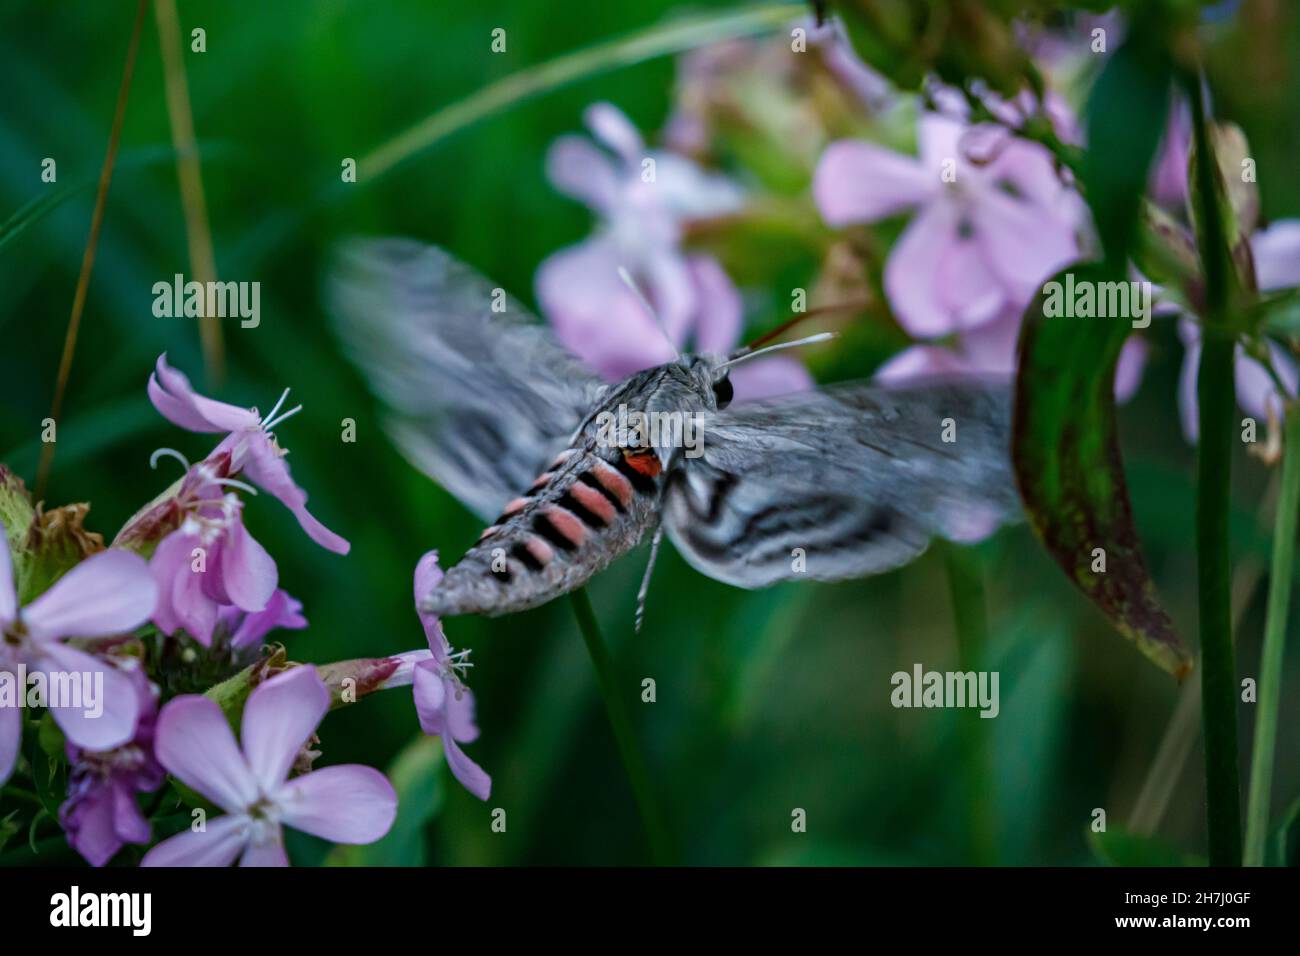 A hawkmoth during a flight at a flower in the evening Stock Photo